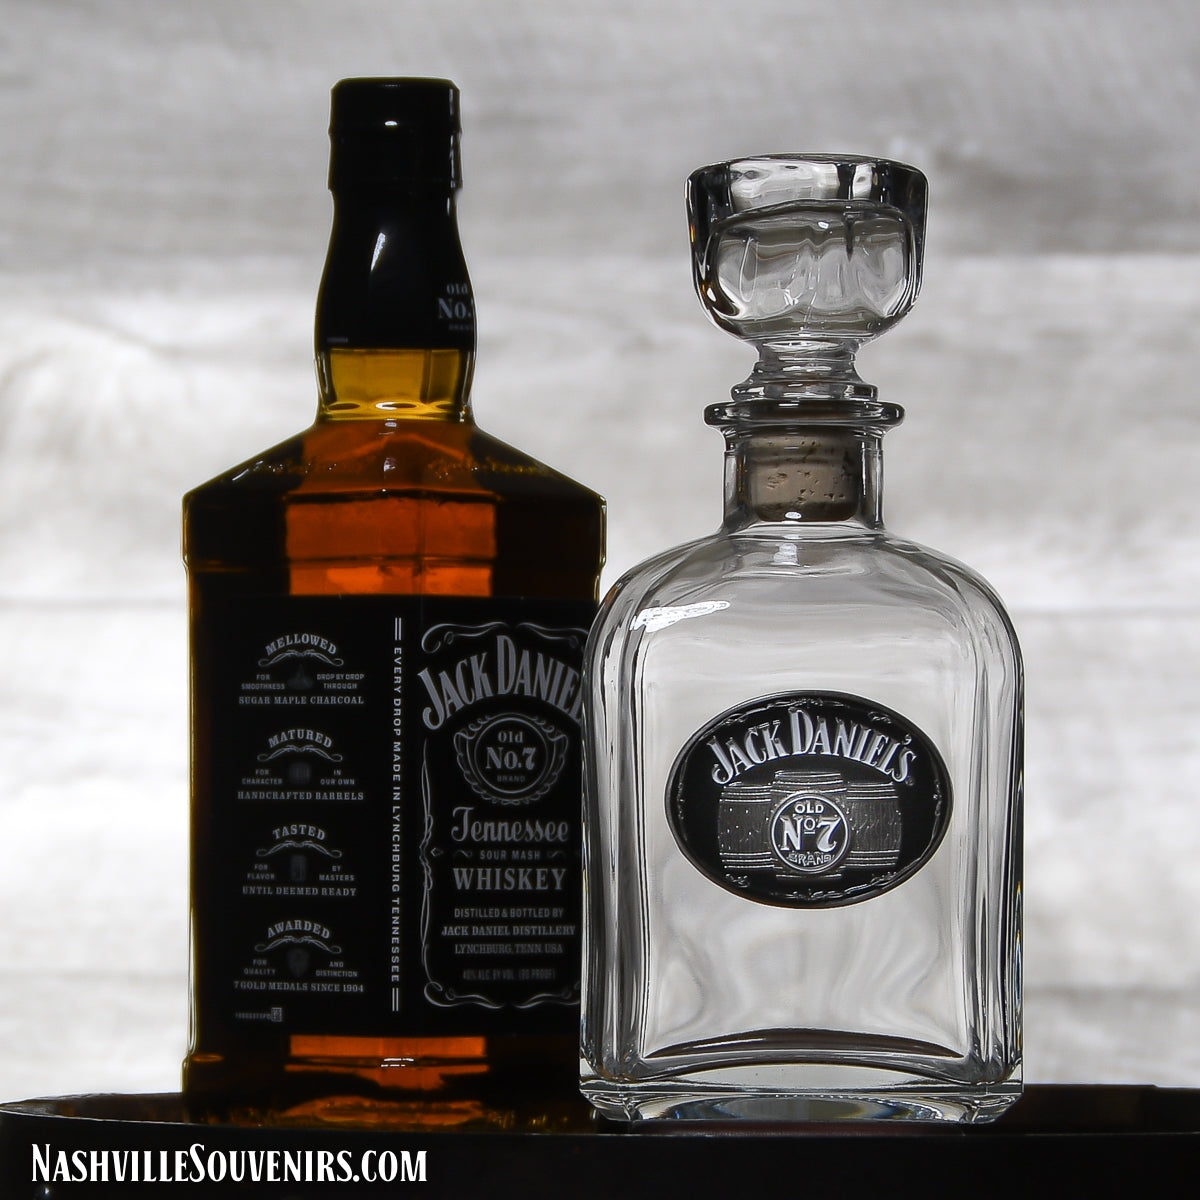 Pour it in style with an officially licensed Jack Daniels Decanter with Medallion. FREE SHIPPING on all US orders over $75!